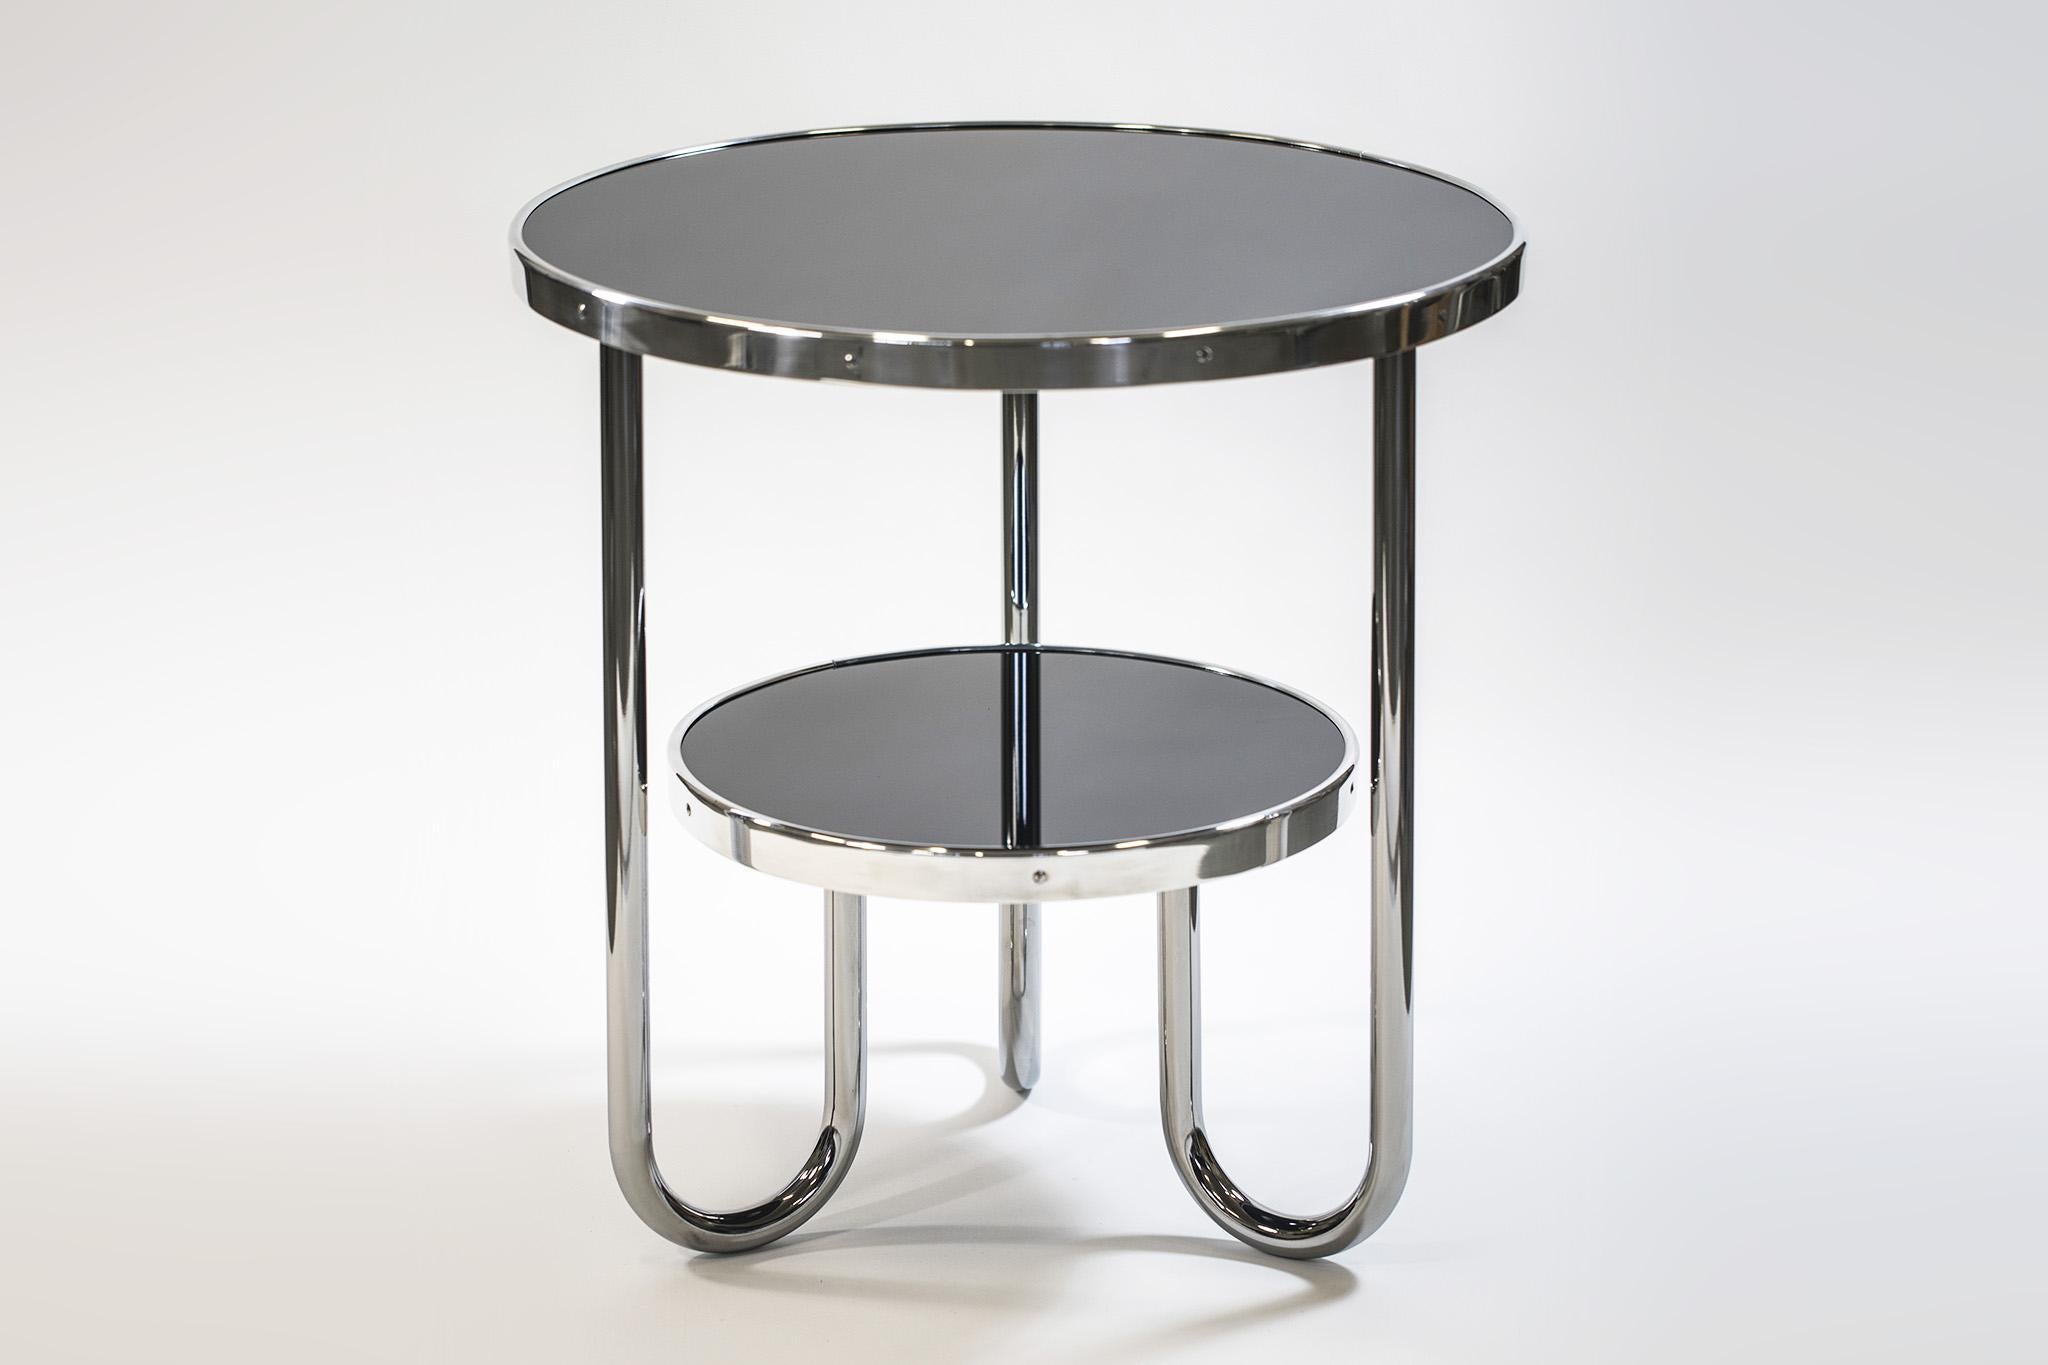 Unusual bauhaus table.
Completely professionally restored
Source: Czechia (Czechoslovakia)
Maker: Kovona
Period: 1970-1979
Material: chrome, glass and lacquered wood.